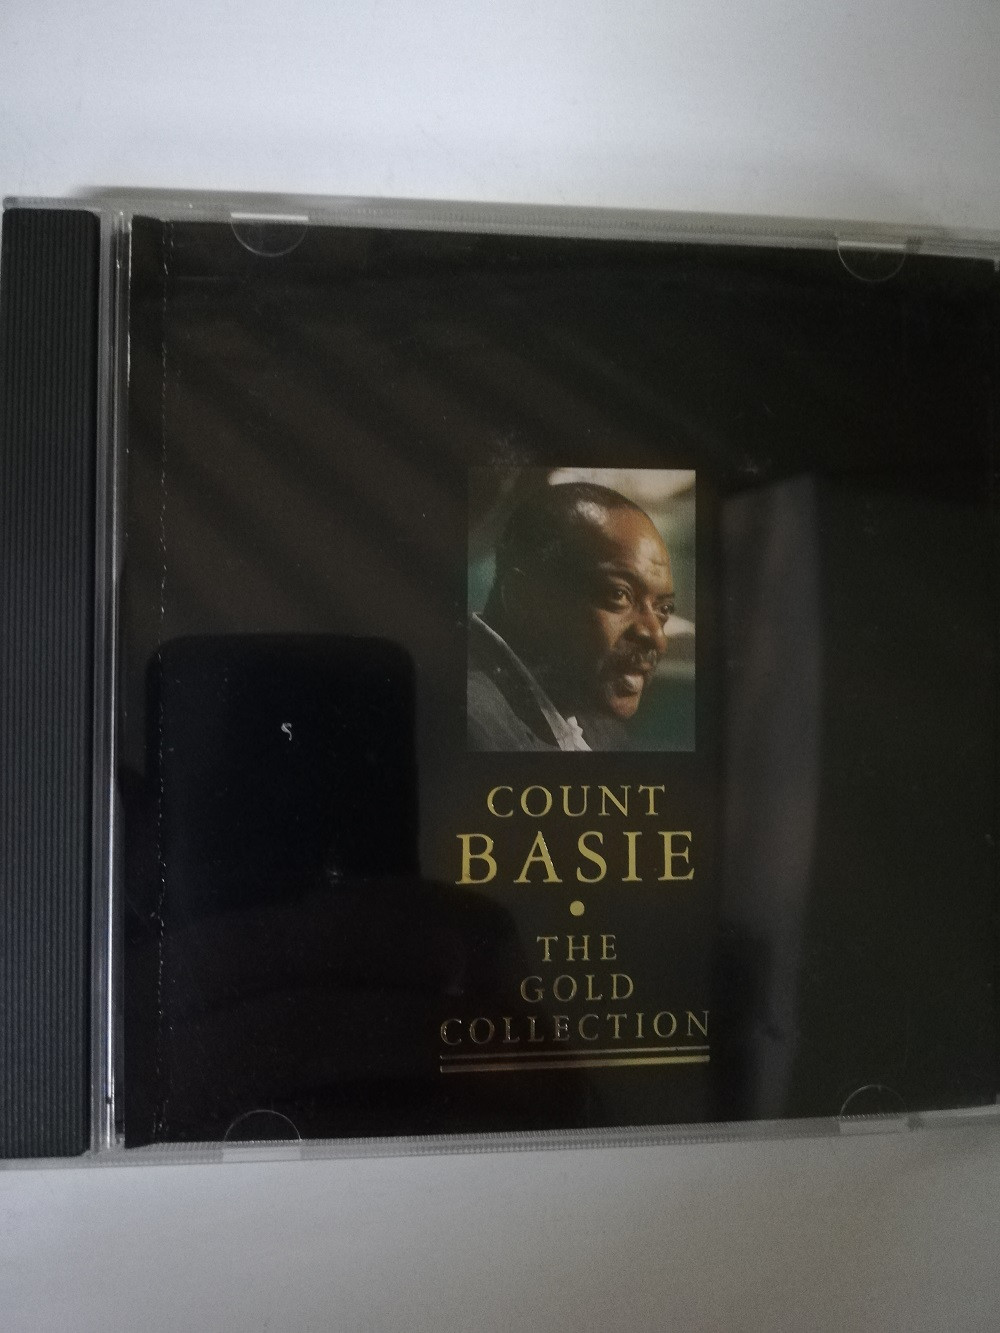 Imagen CD COUNT BASIE - THE GOLD COLLECTION 1